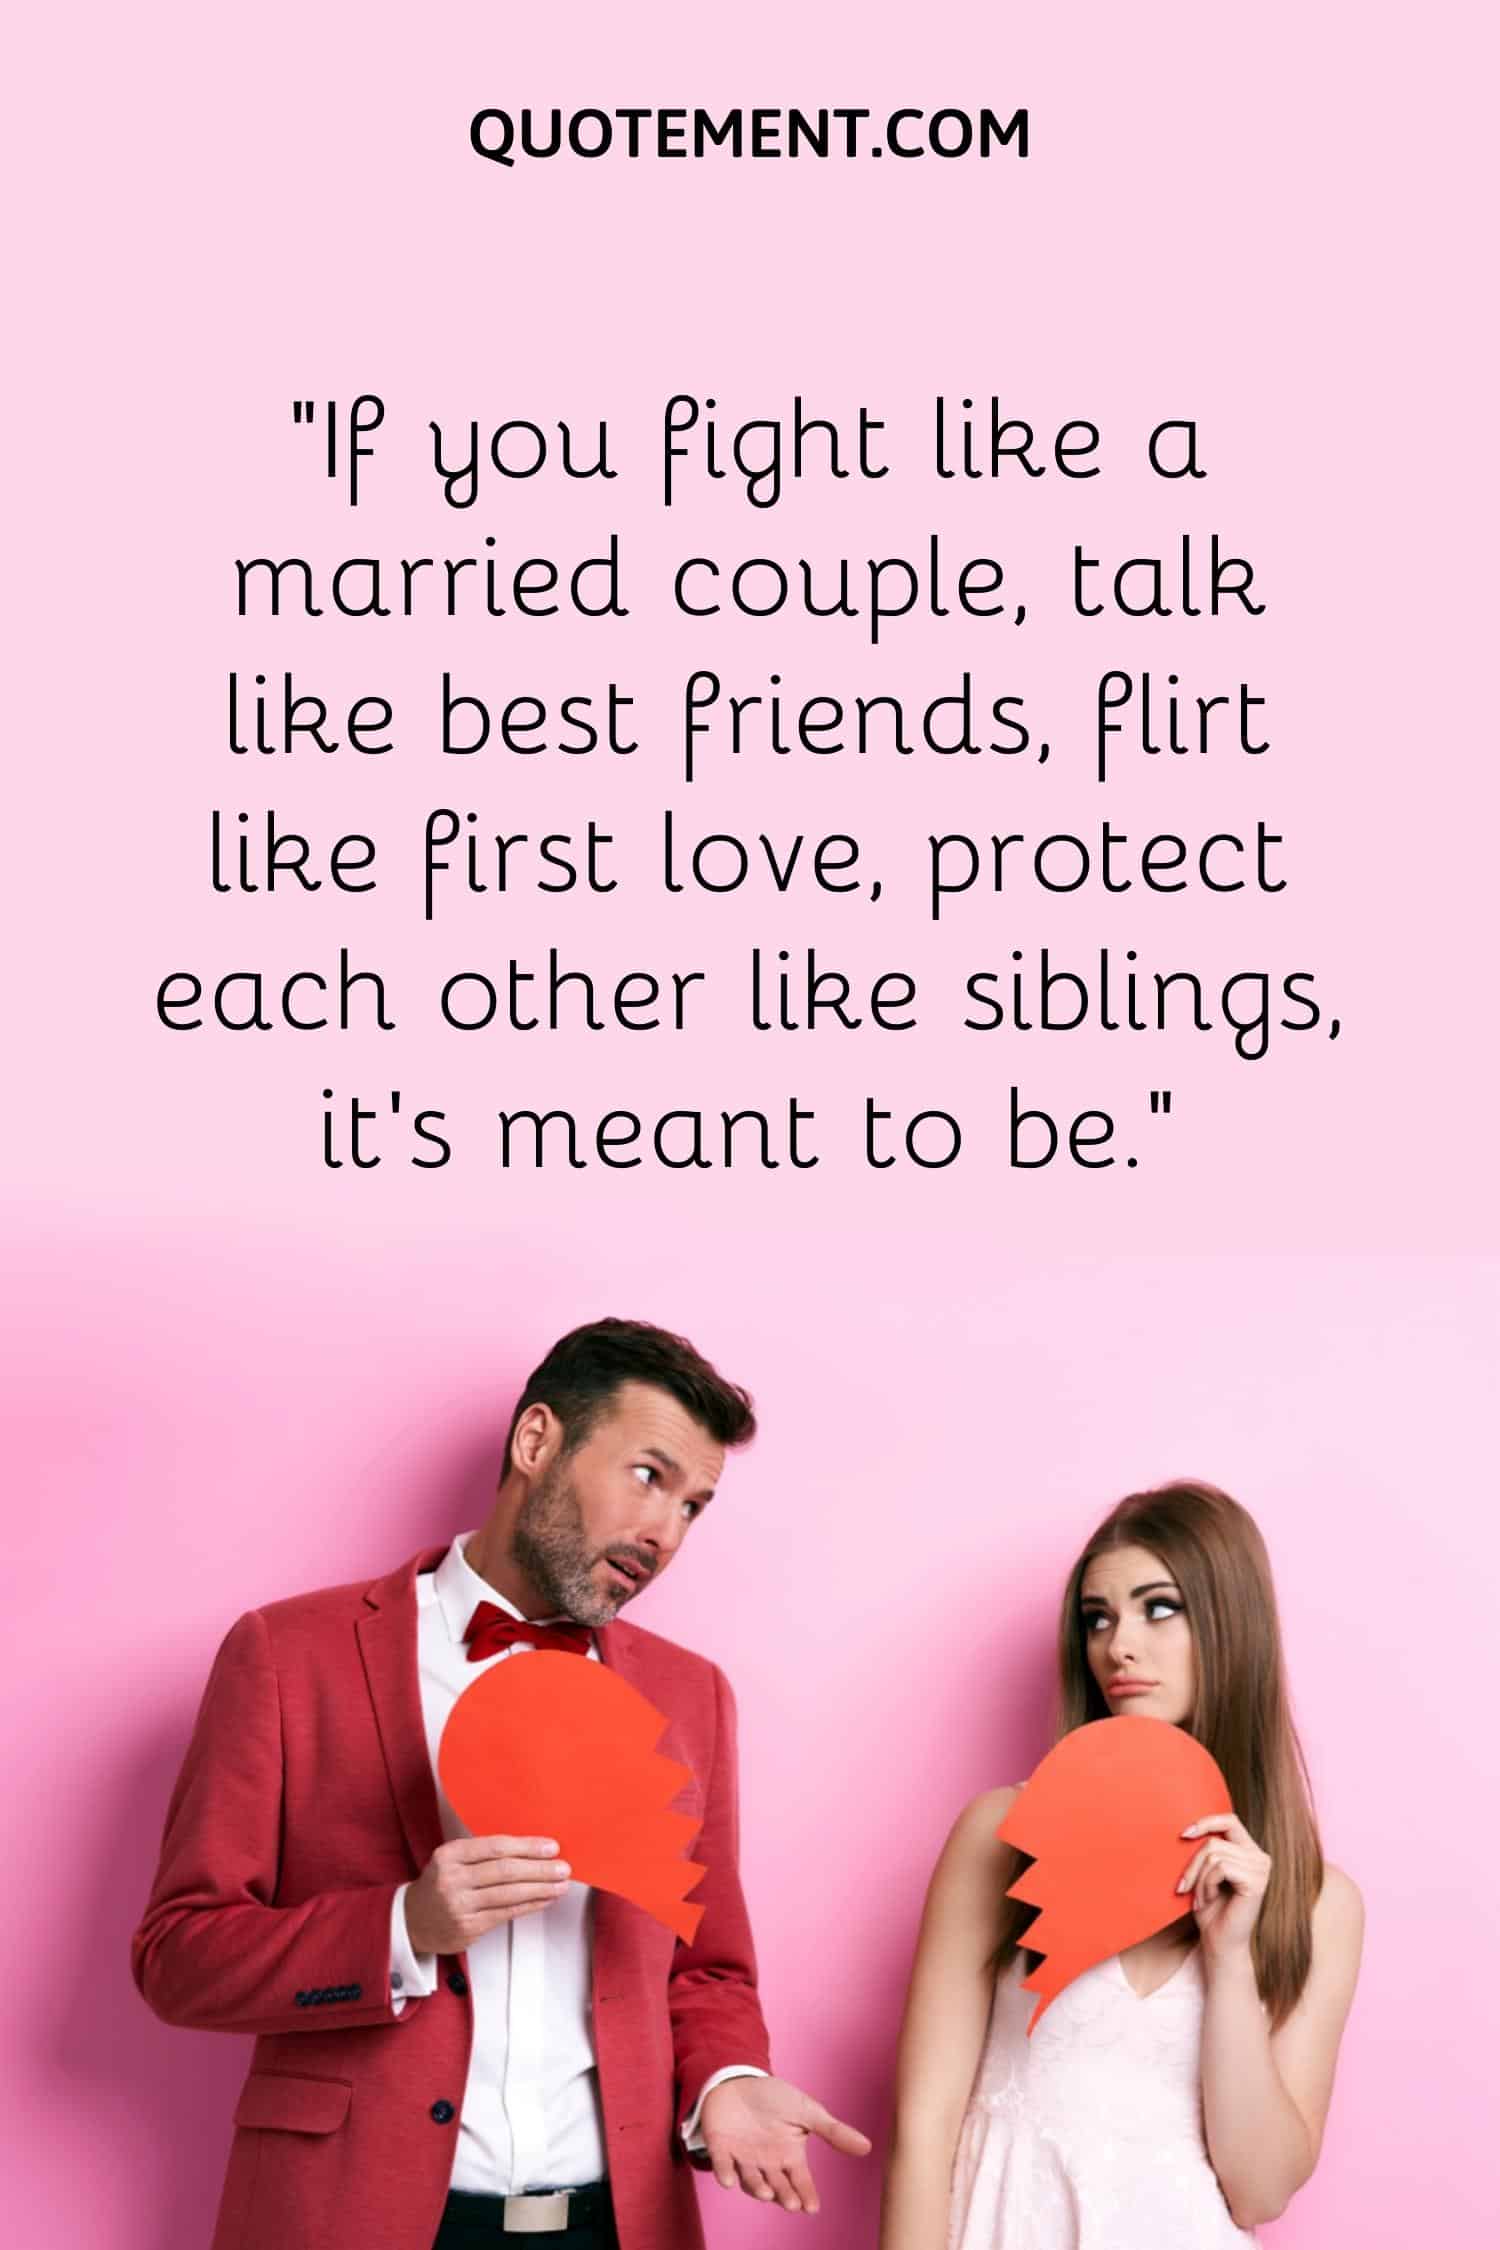 “If you fight like a married couple, talk like best friends, flirt like first love, protect each other like siblings, it’s meant to be.”